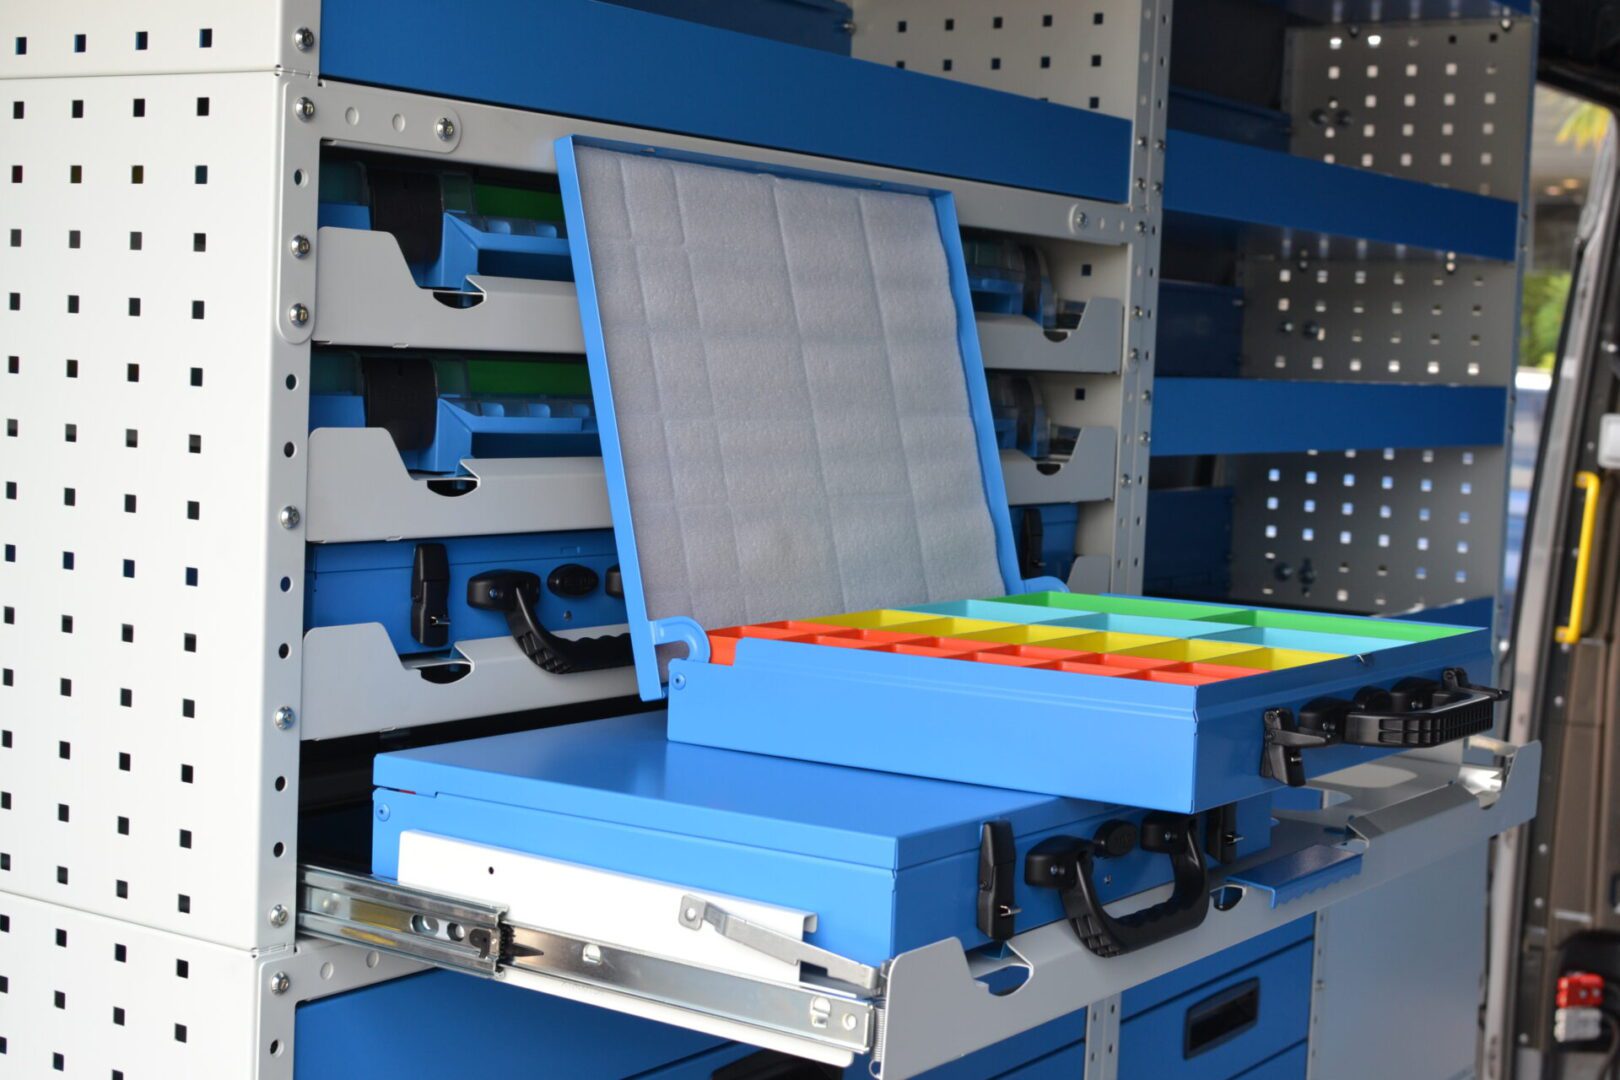 MAN van racking system view metal parts case open with coloured mini bins